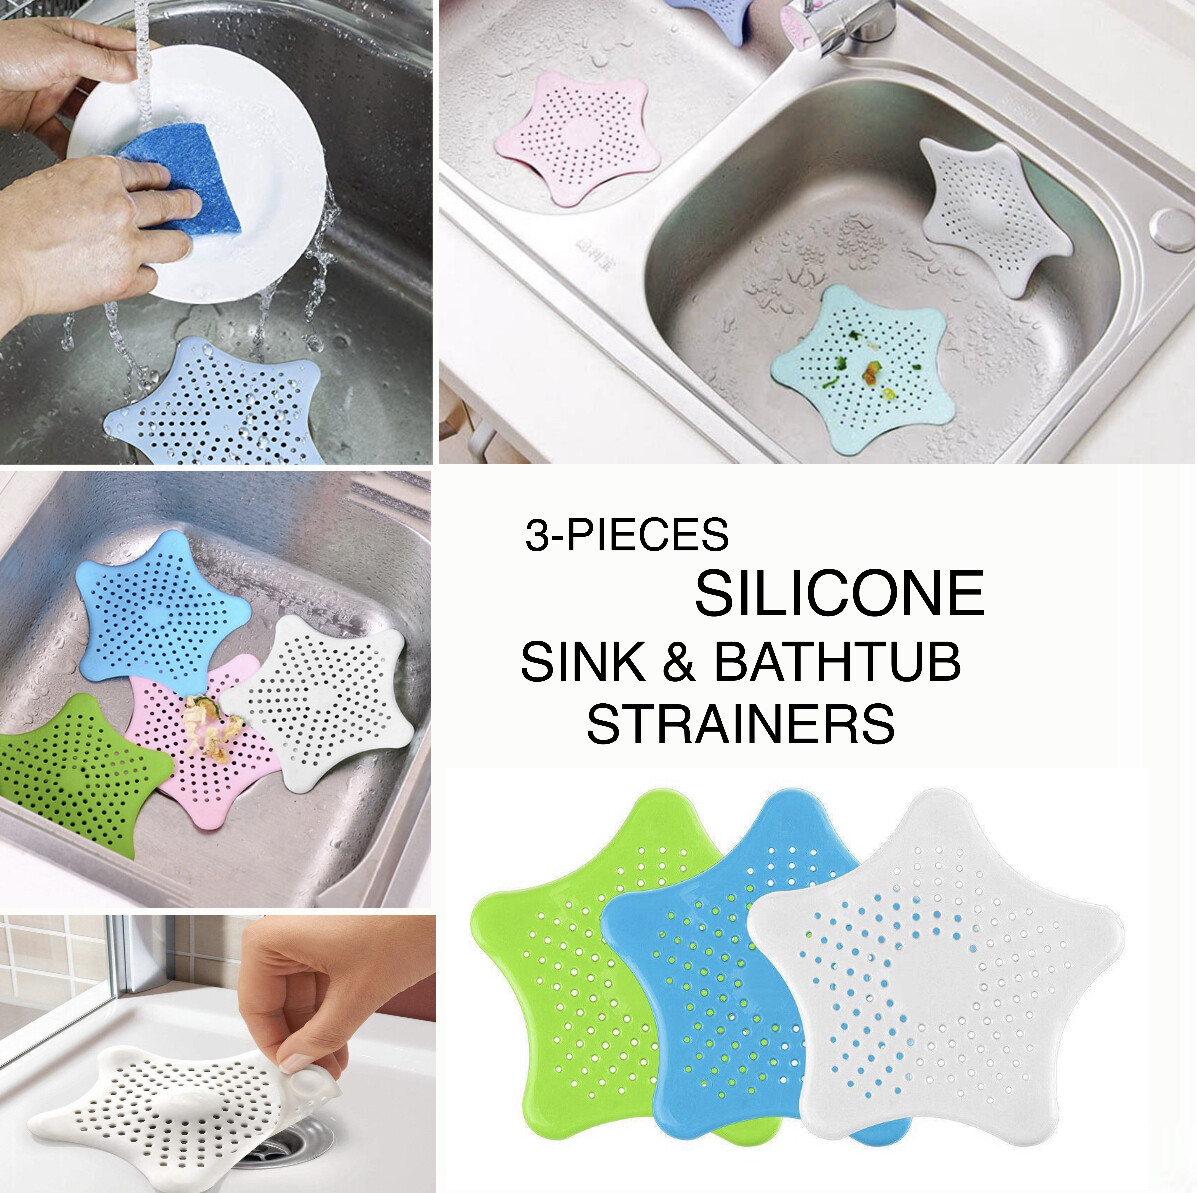 4-Pcs Silicone Strainers